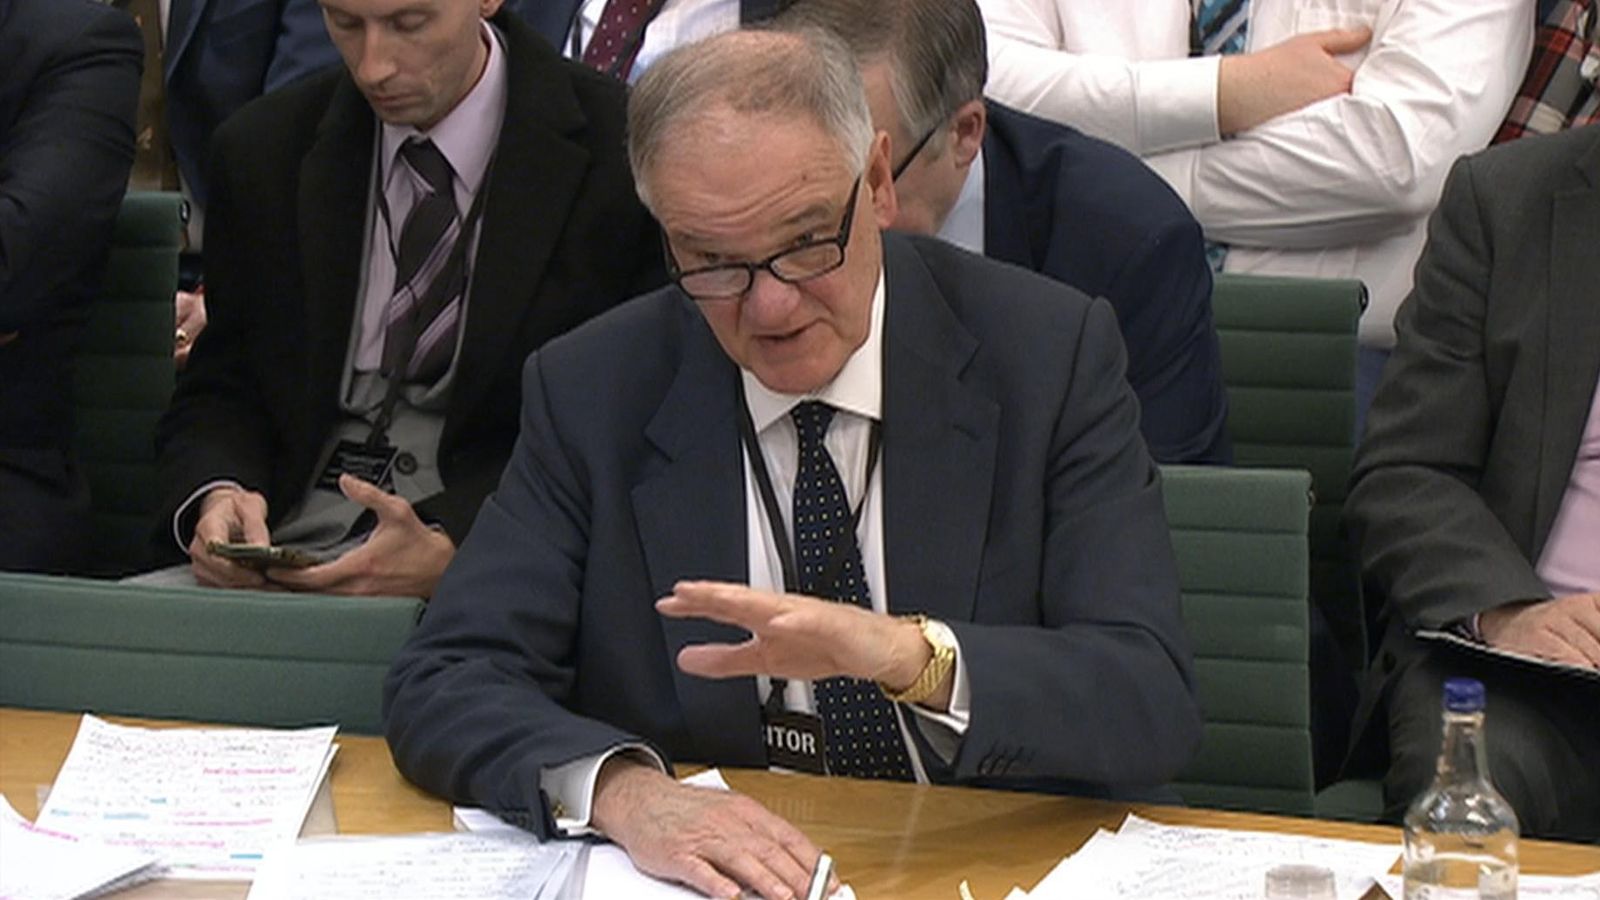 Post Office chief executive Nick Read subject of 80-page HR investigation, former chairman Henry Staunton says